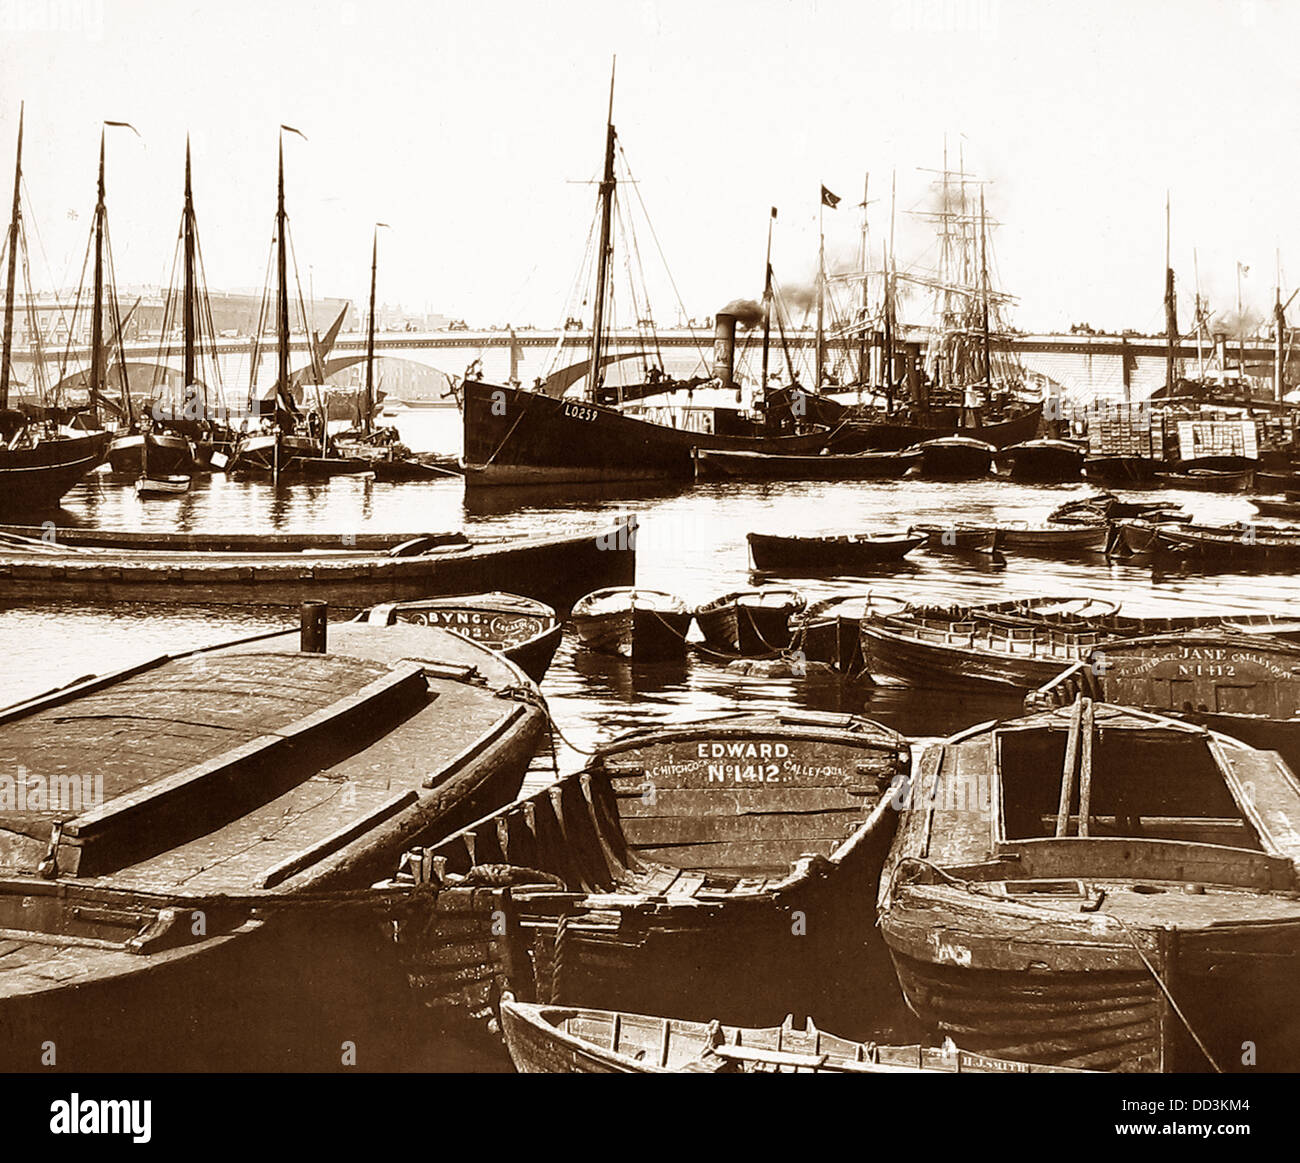 The Pool of London Victorian period Stock Photo - Alamy